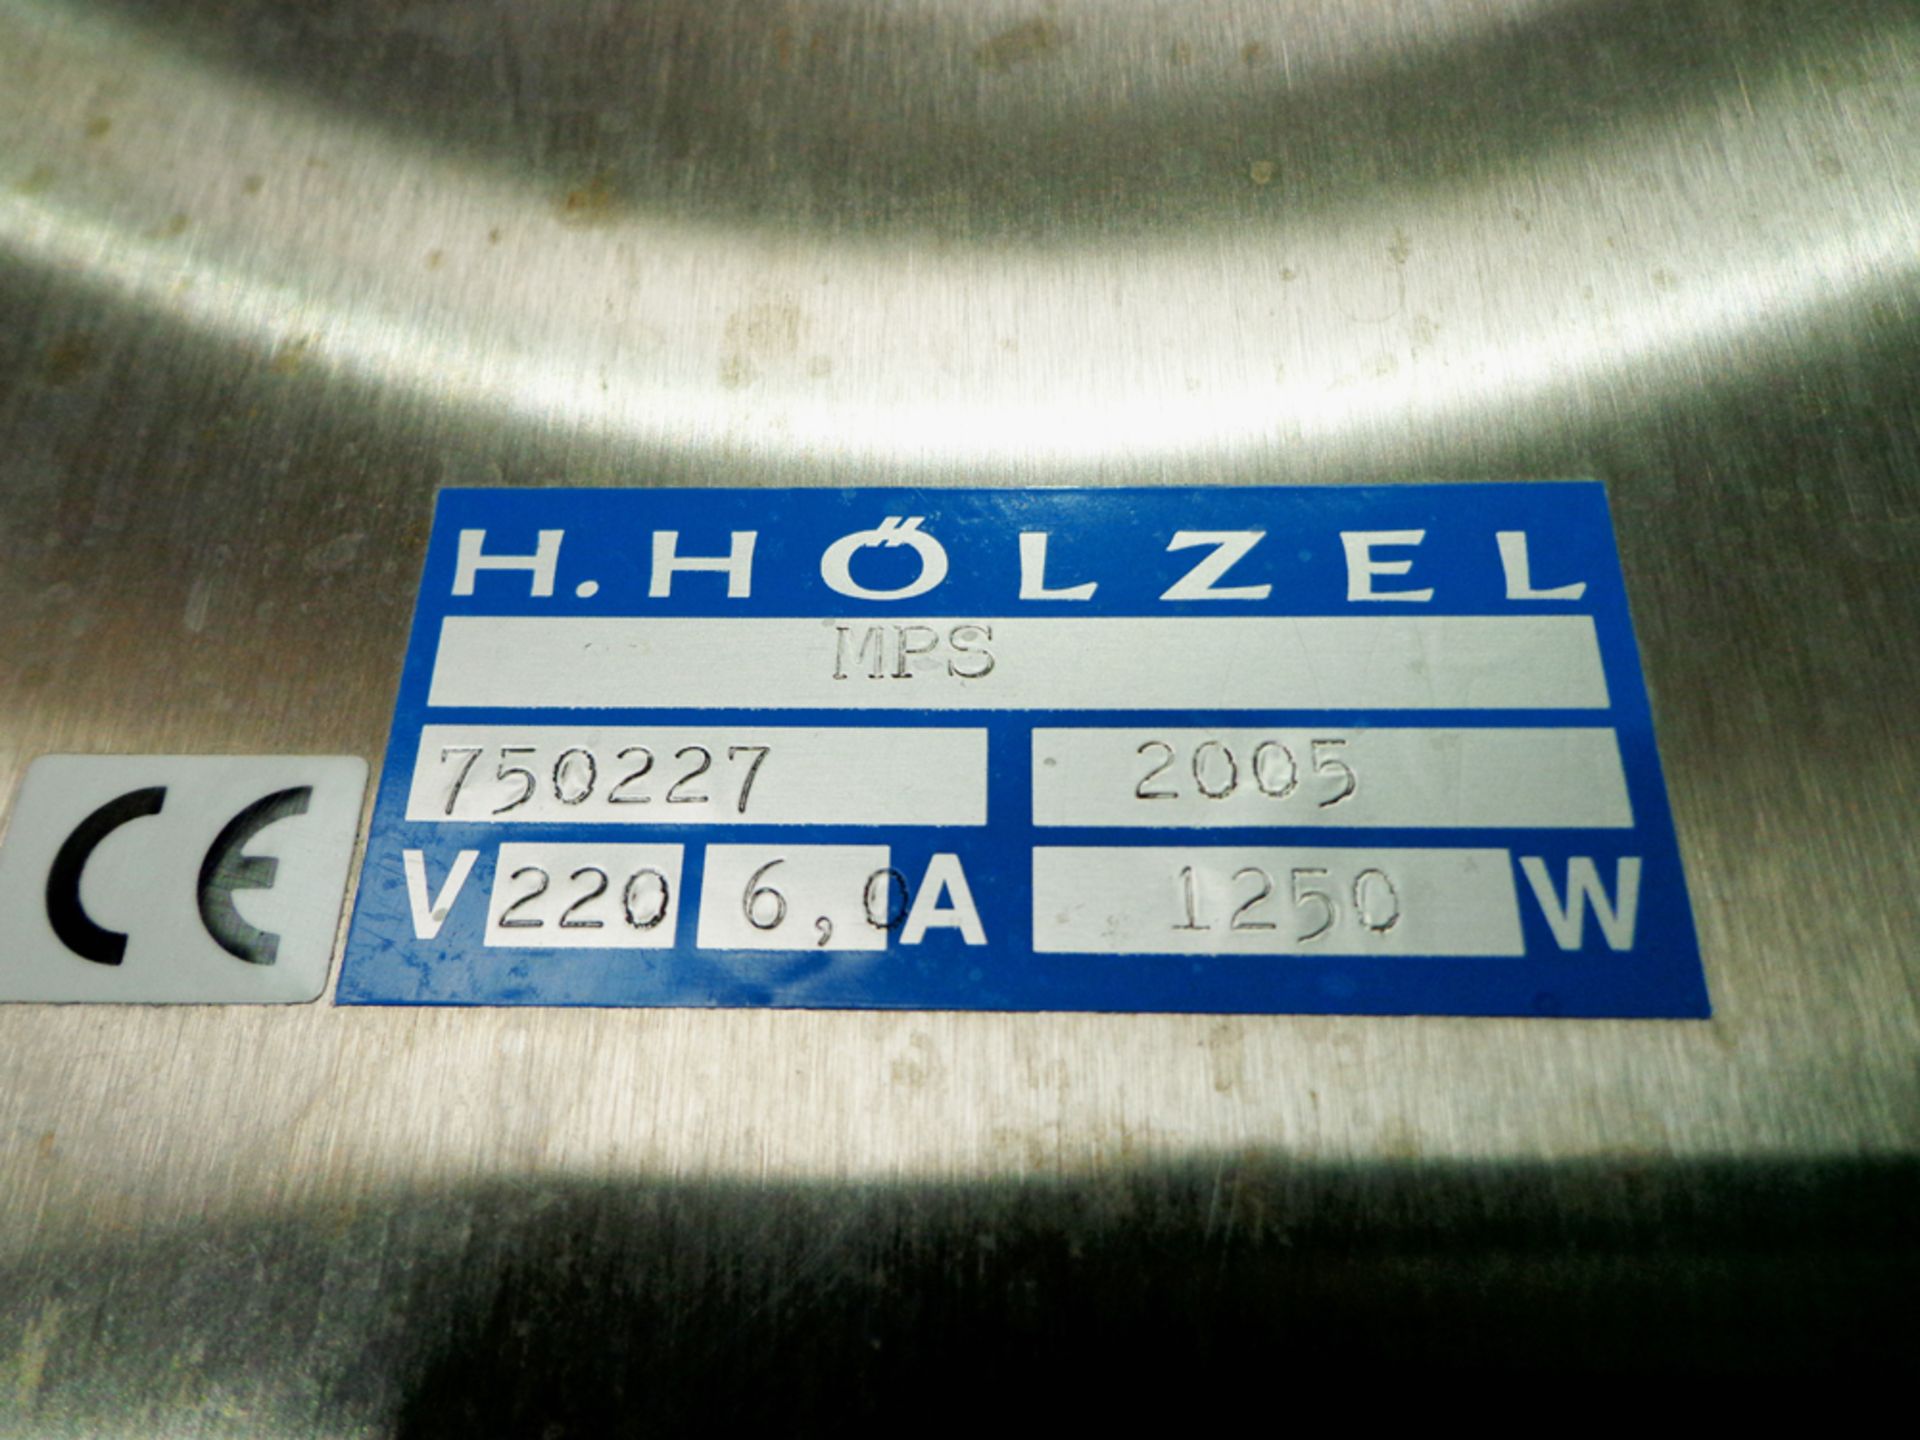 H.Holzel MPS Pipette Cleaner, Ref 750227 - Image 7 of 7